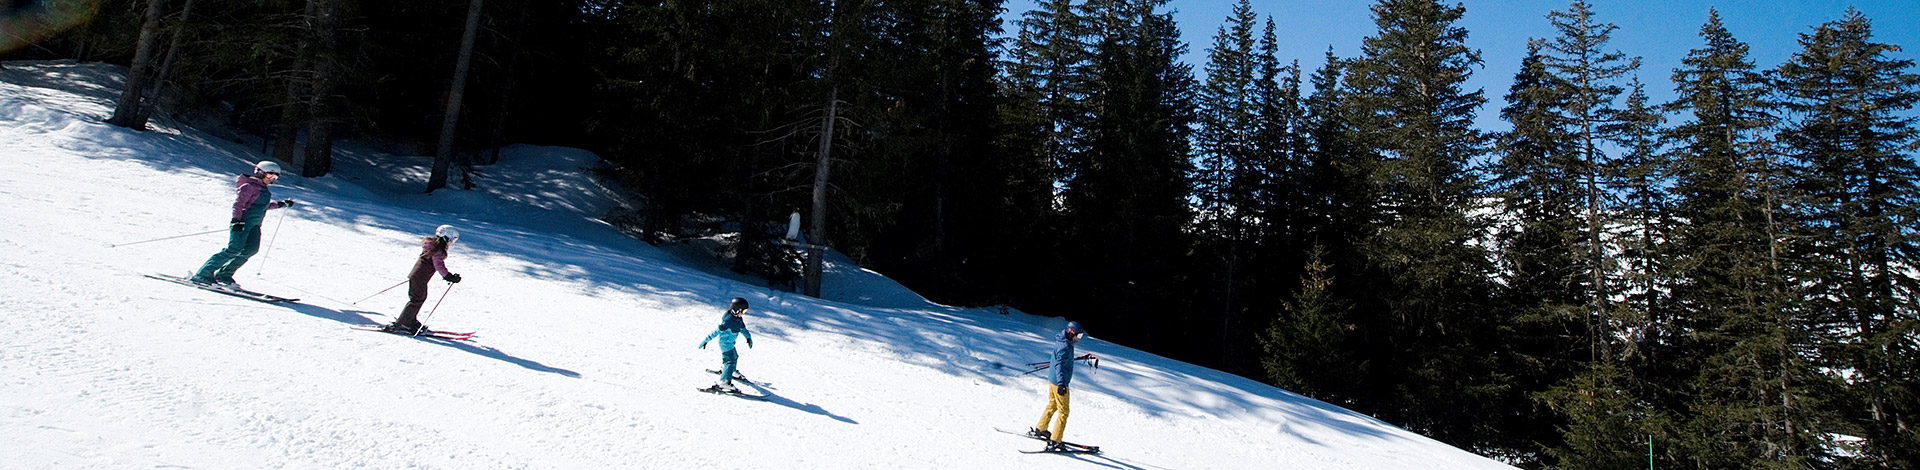 Skiing in Méribel with your family in the middle of forest at the Altiport sector